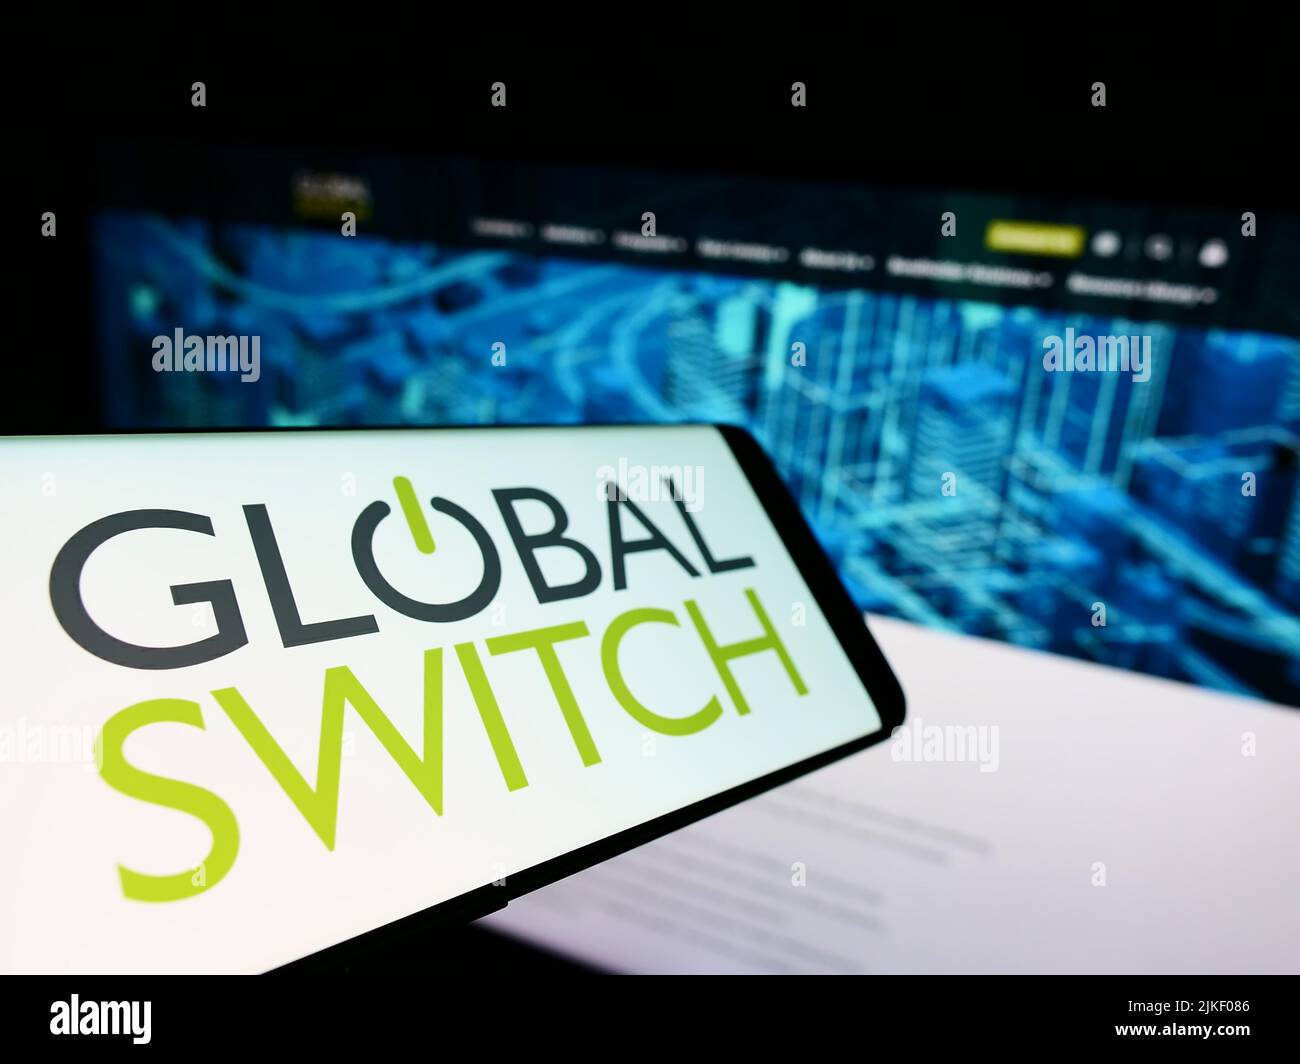 Cellphone with logo of British data center company Global Switch Limited on screen in front of business website. Focus on left of phone display. Stock Photo